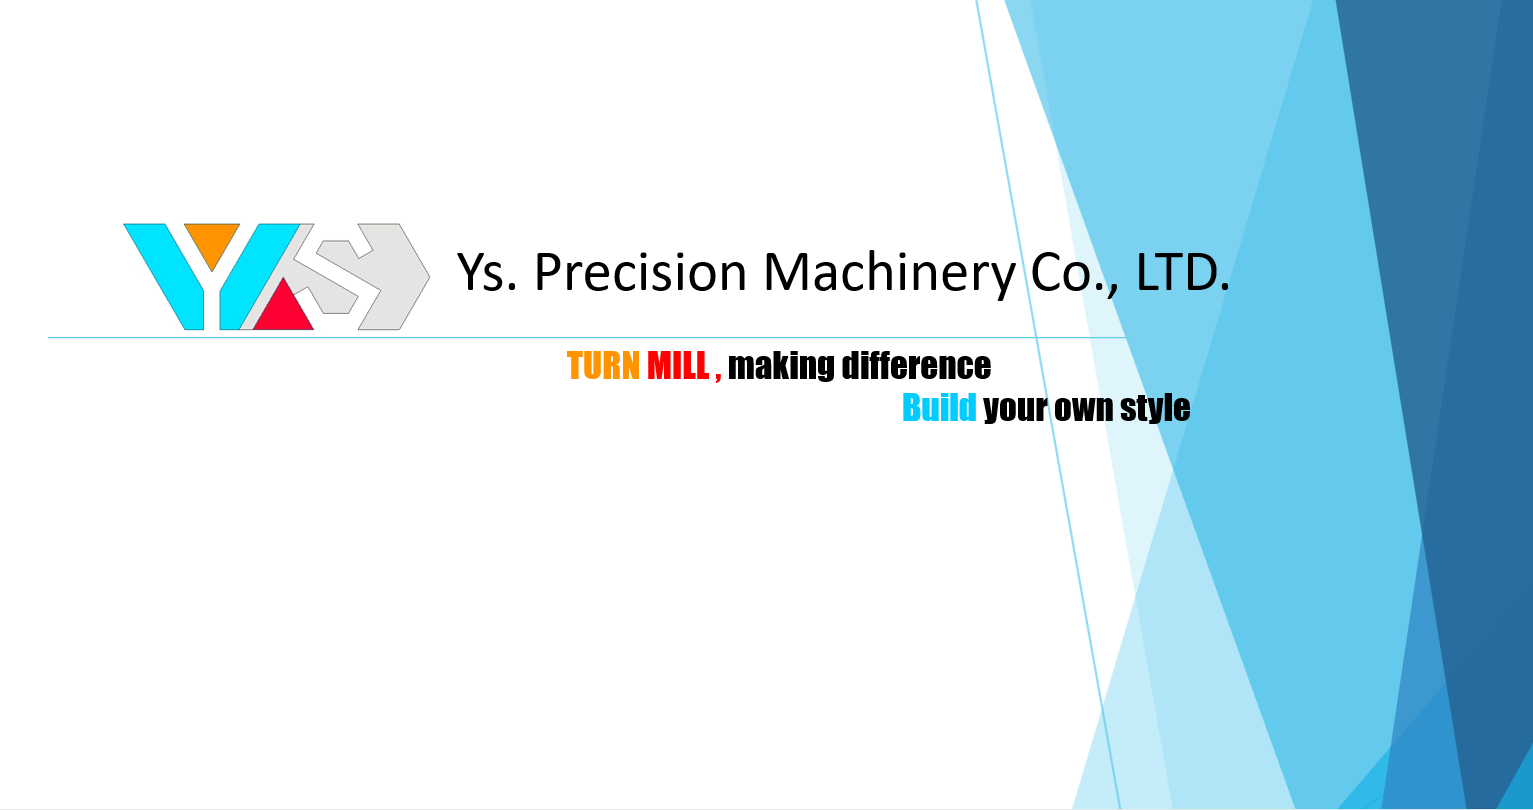 Ys. Precision Machinery Exhibition Online Booth